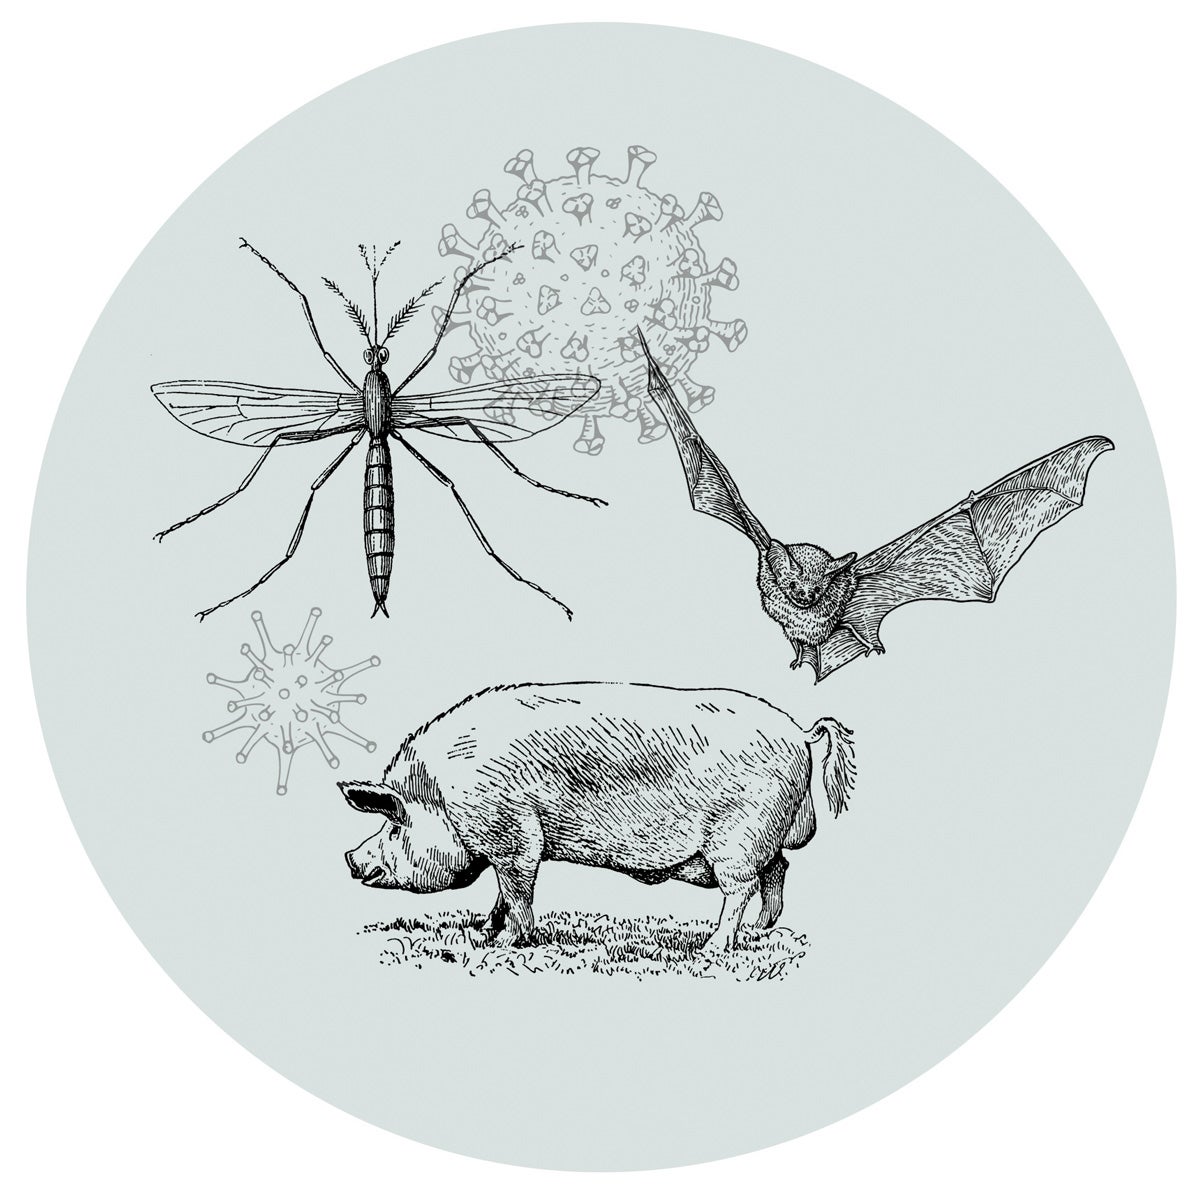 illustration of a pig, mosquito and bat